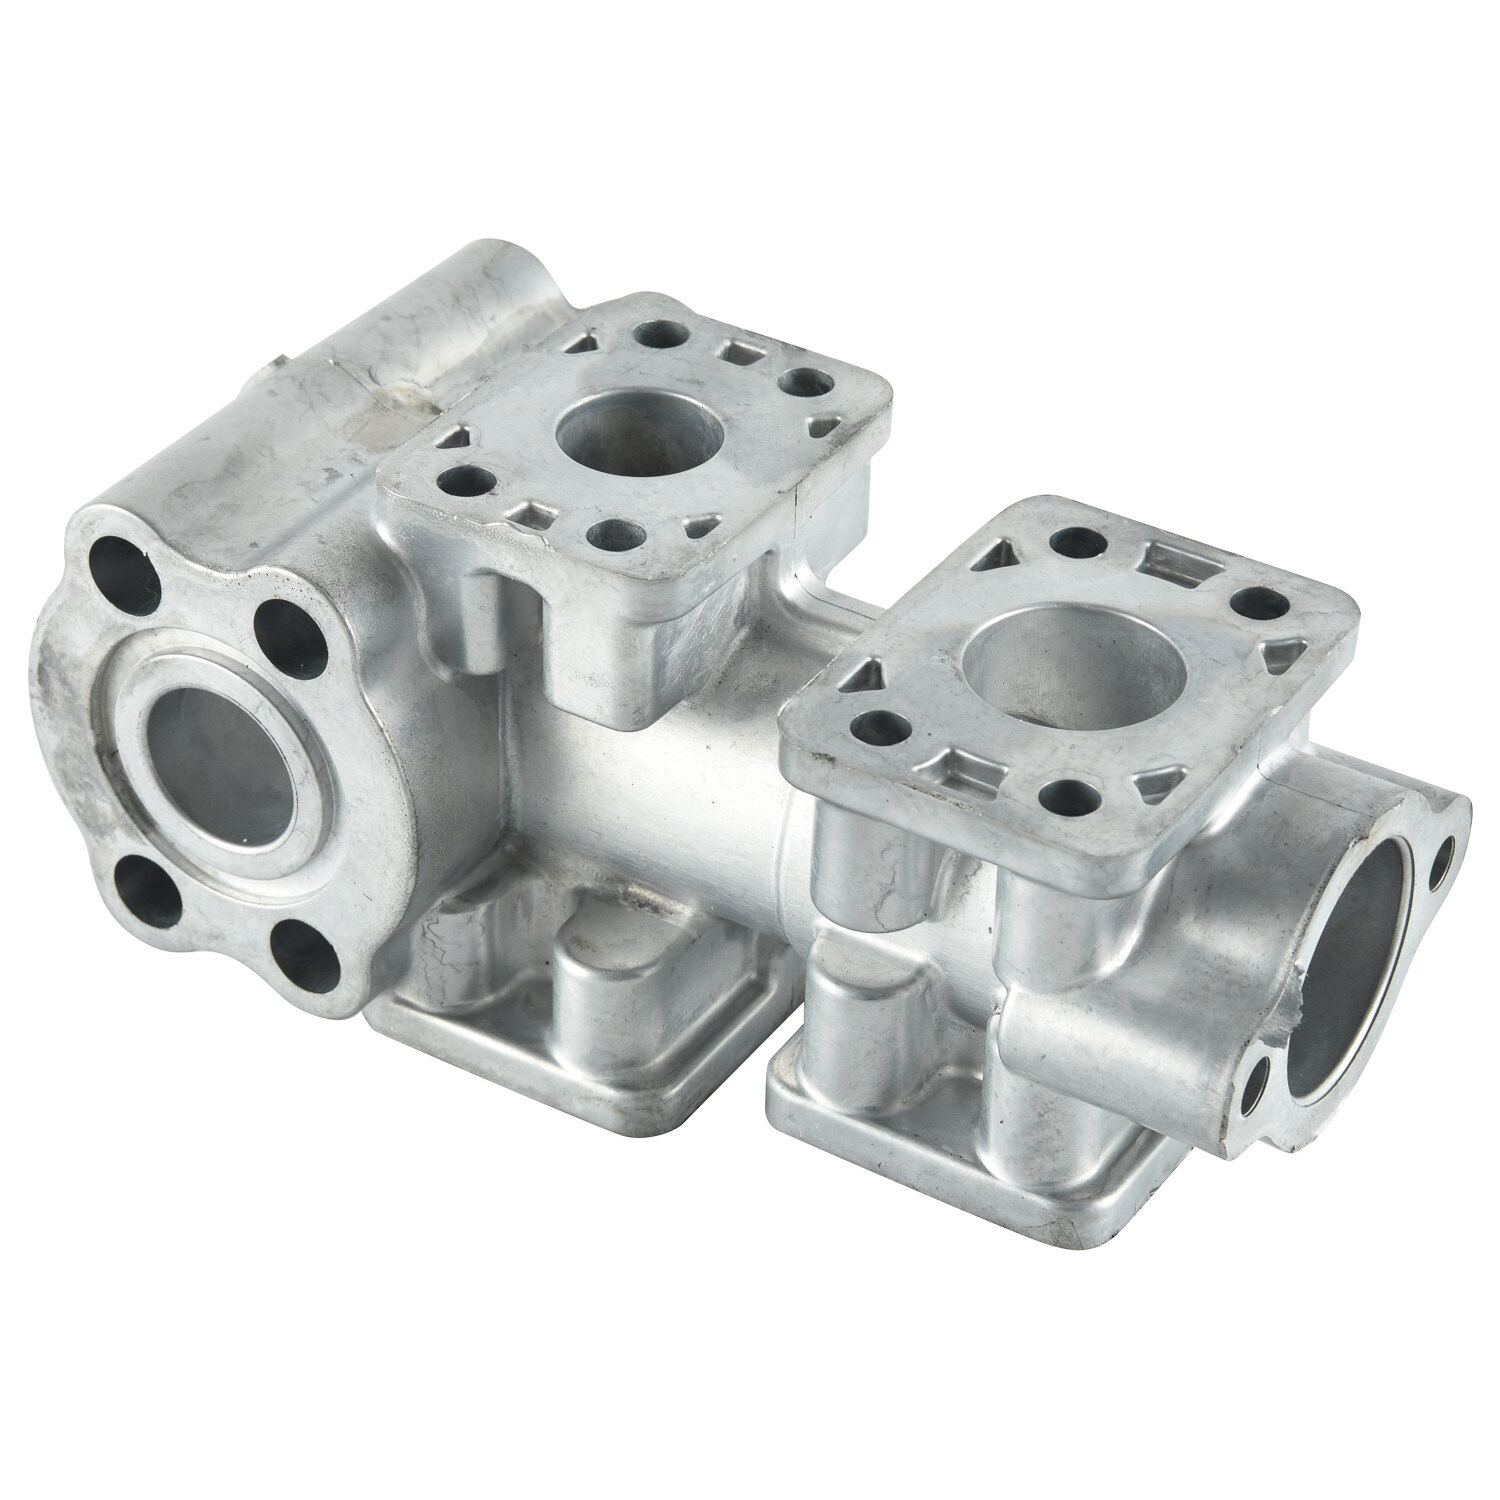 Die casting mold (cold chamber)